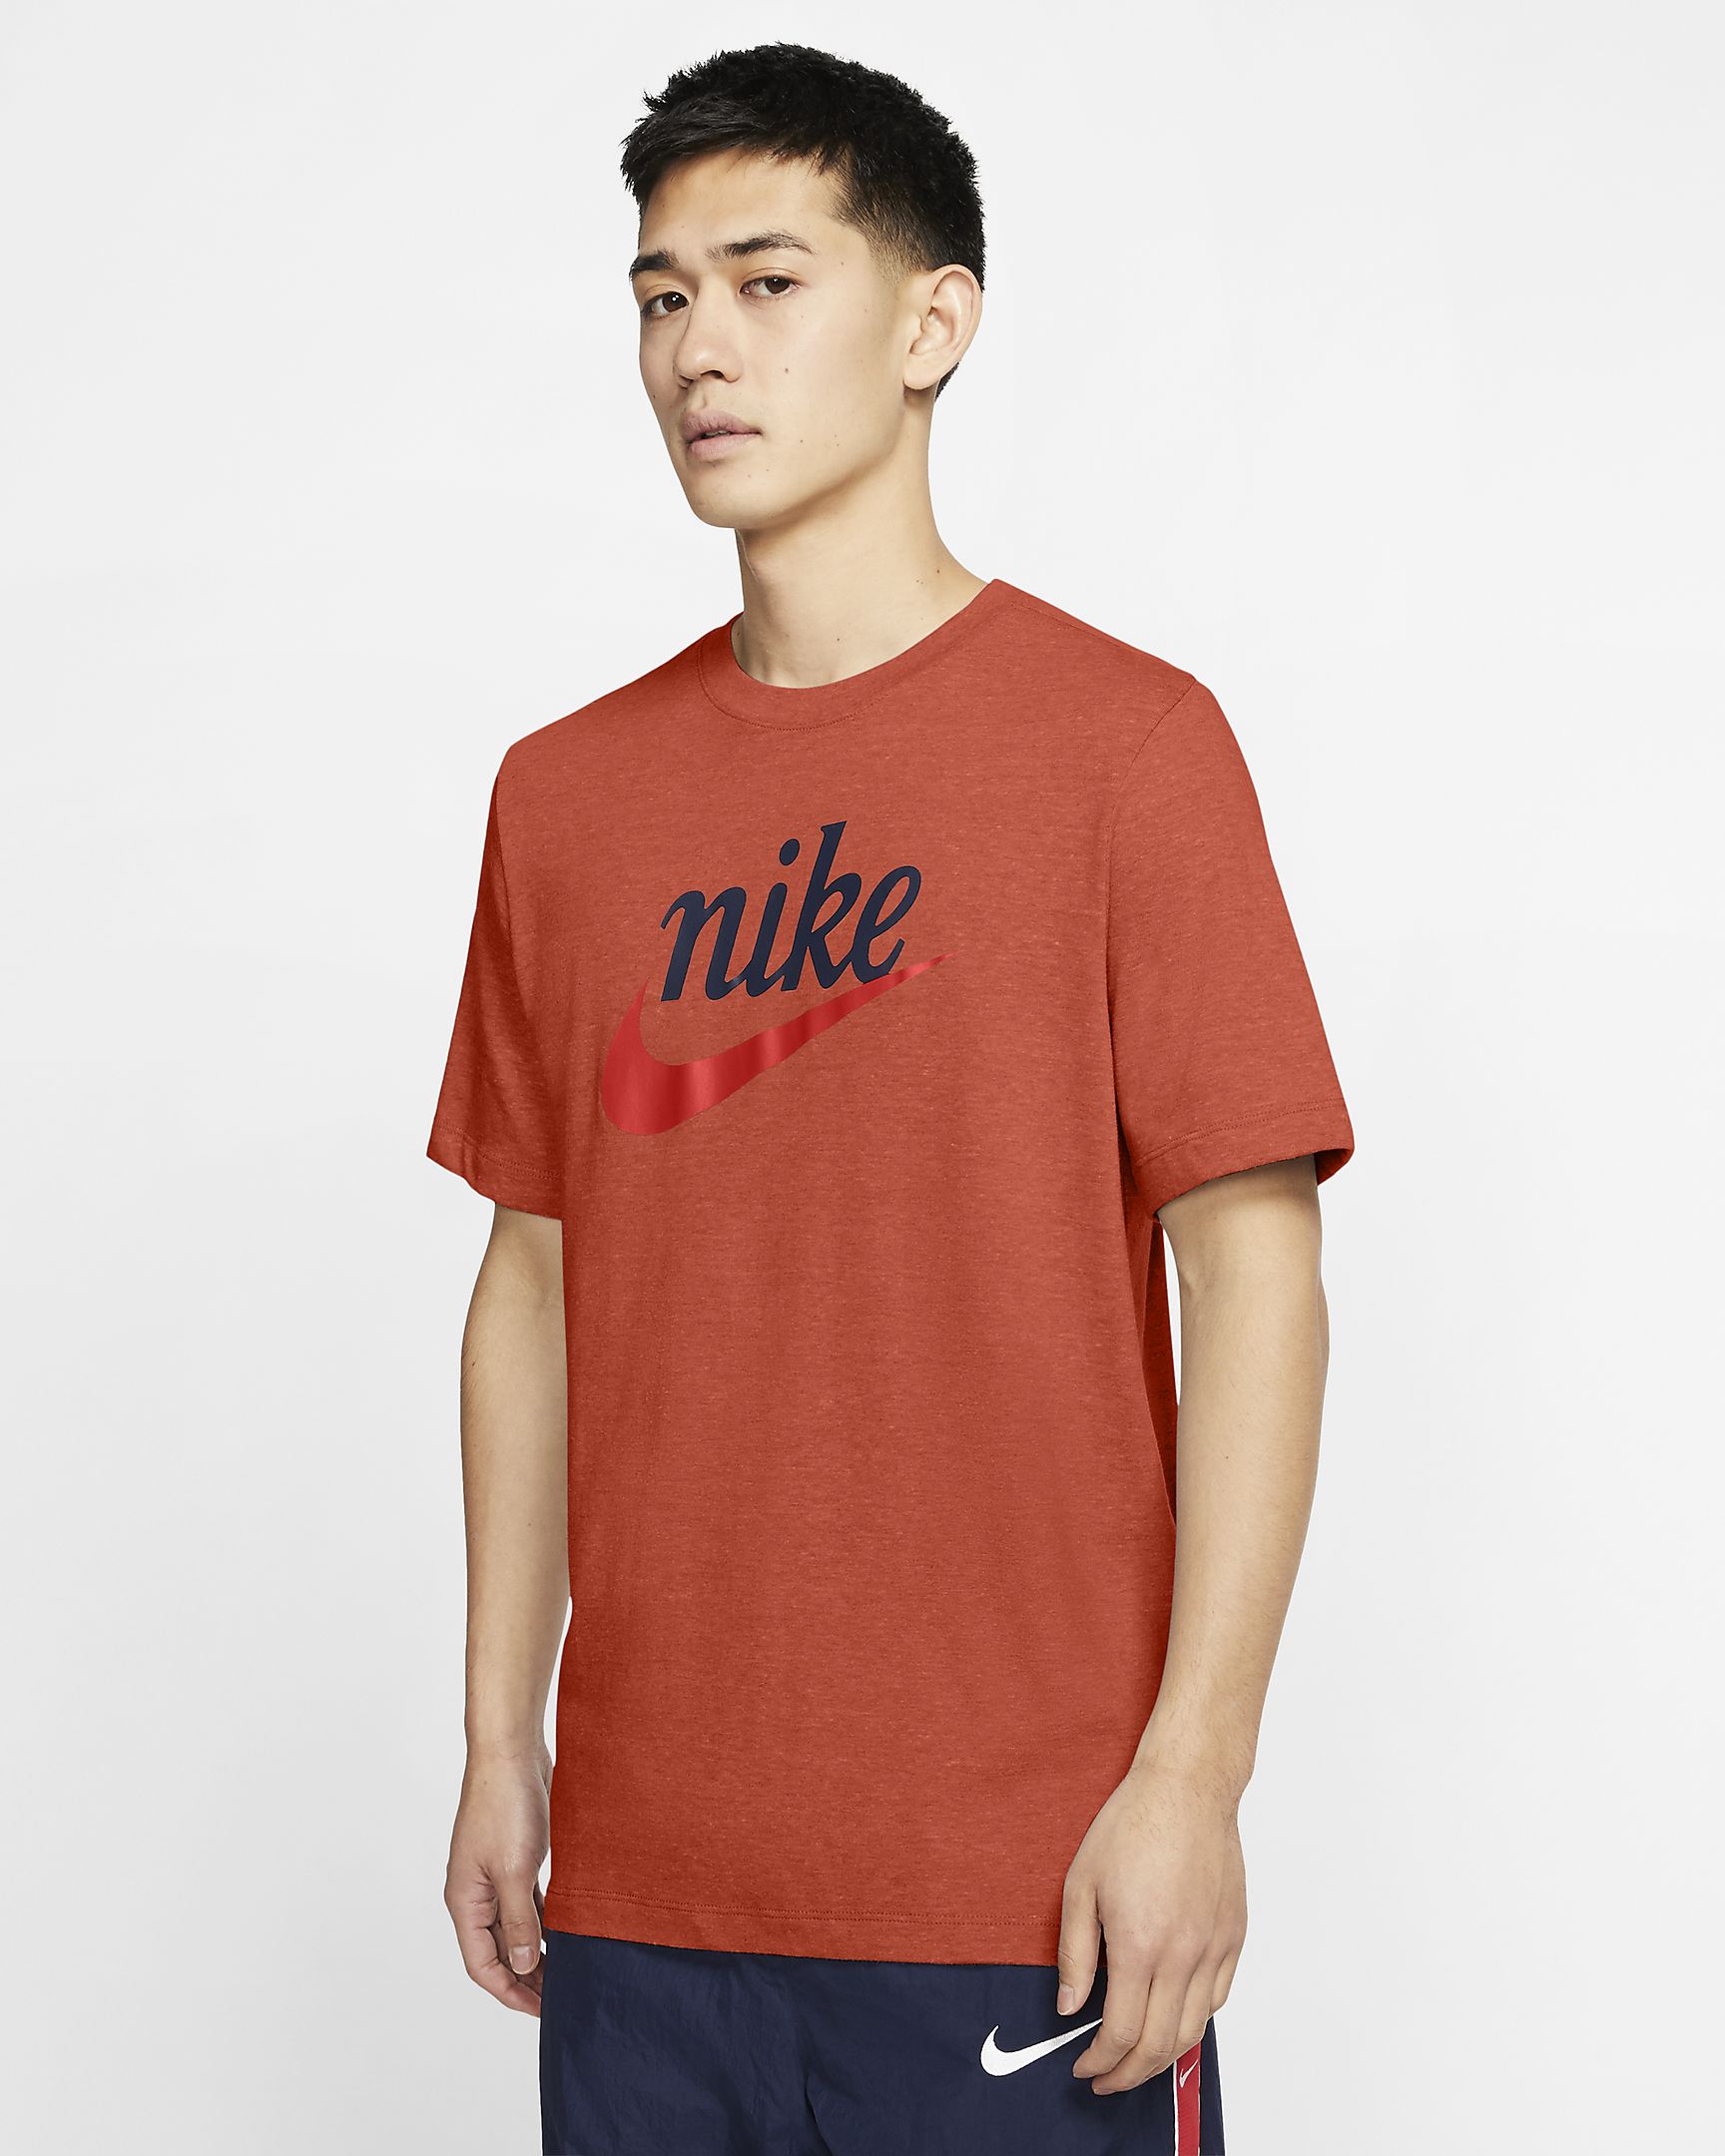 Nike Air Max 1 Martian Sunrise Shirts Clothing Outfit Match